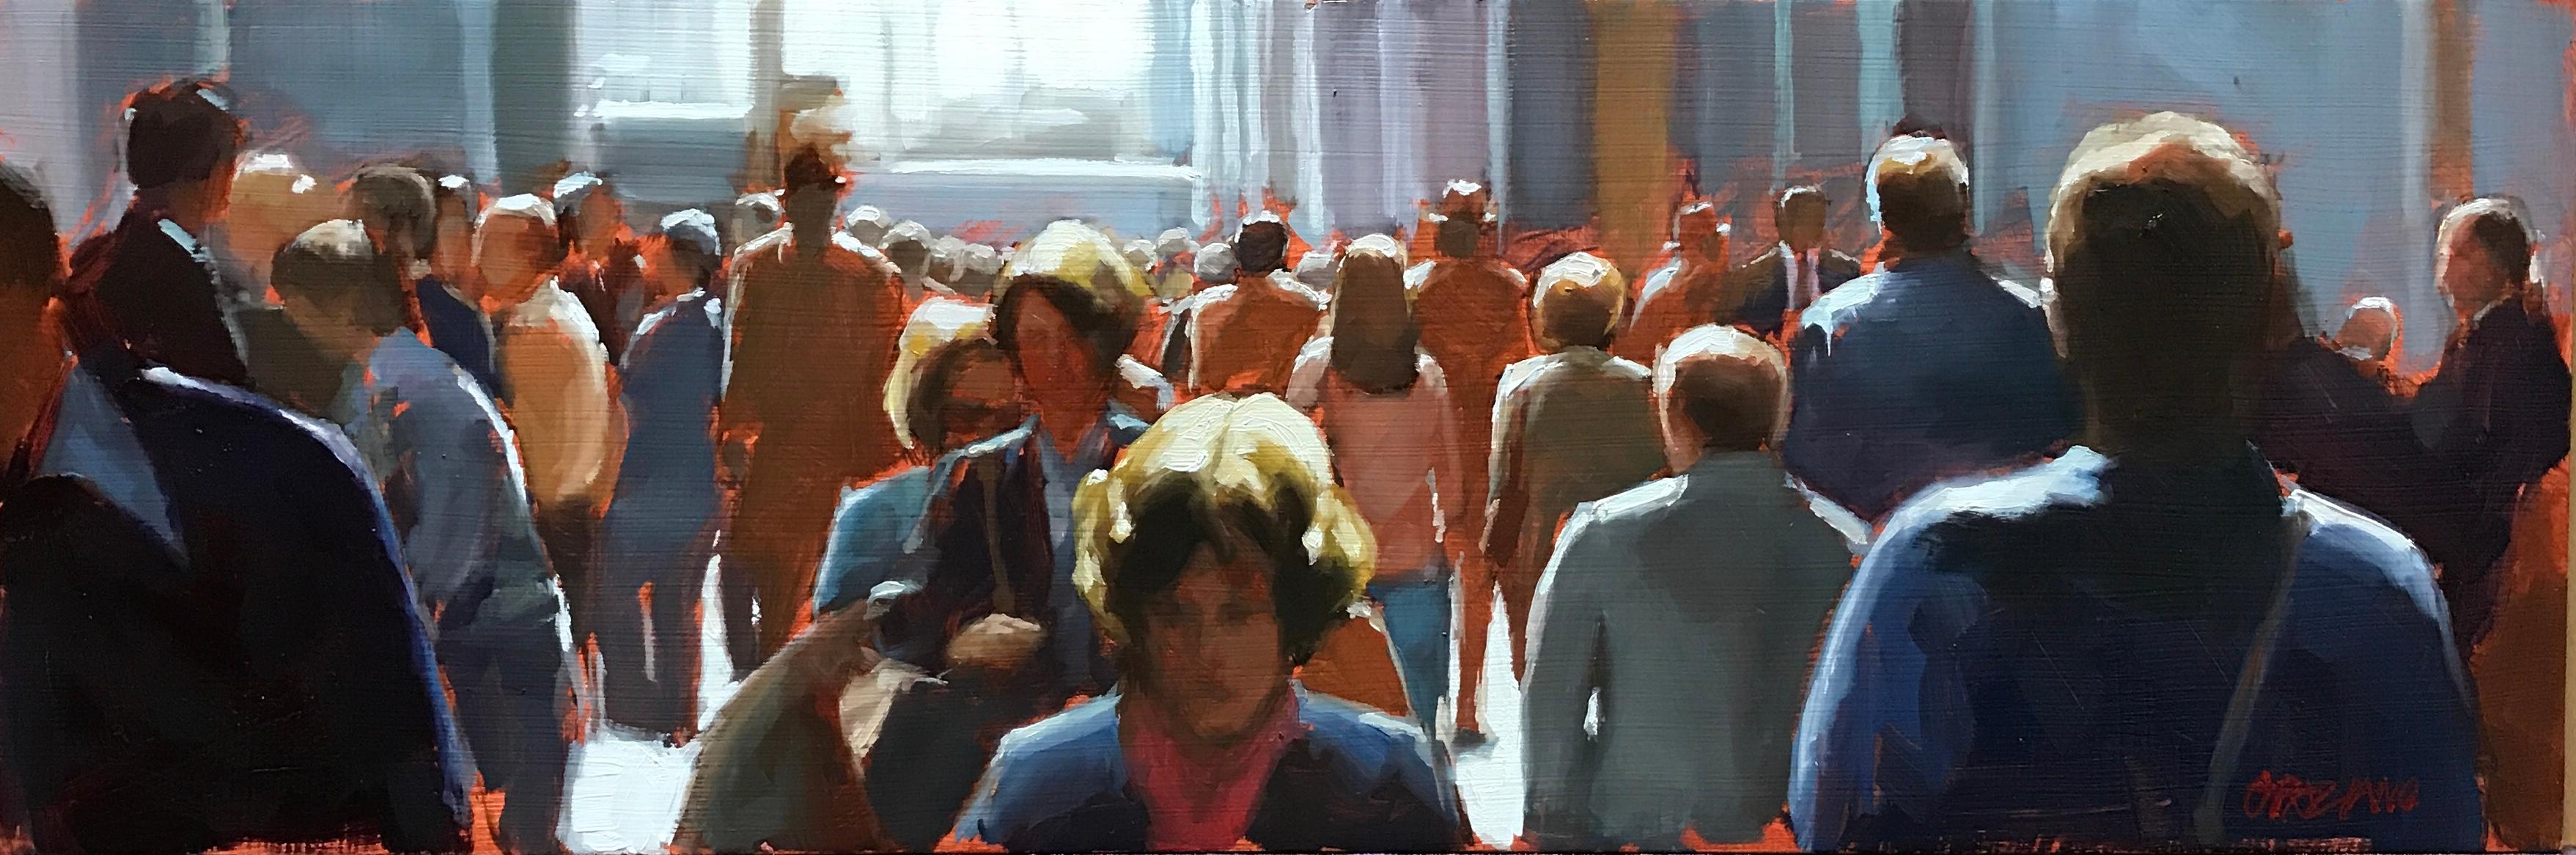 Dan Graziano  Landscape Painting - "Midtown", Oil Painting